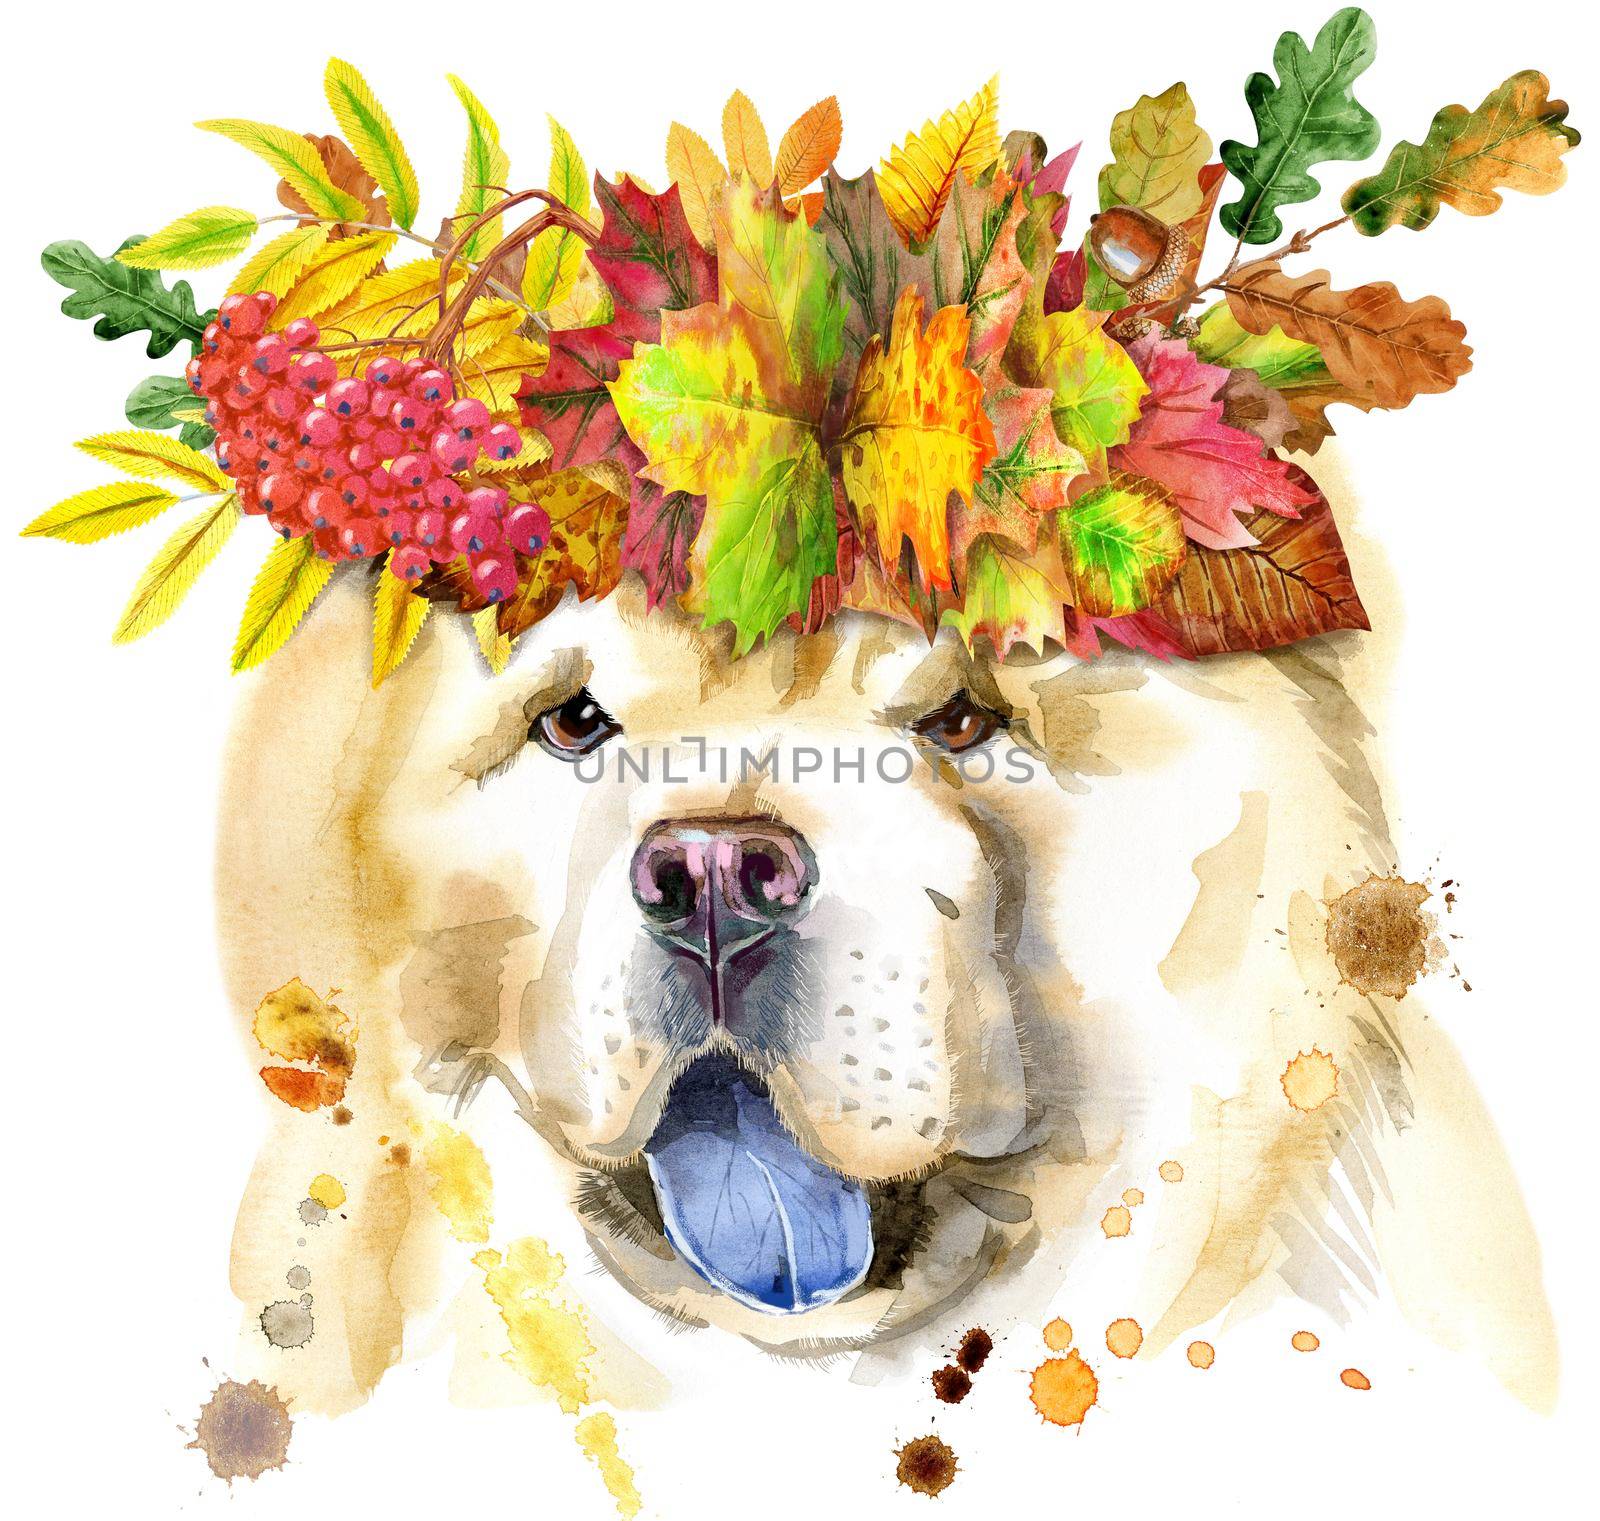 Cute Dog with wreath of leaves. Dog T-shirt graphics. watercolor chow-chow dog illustration